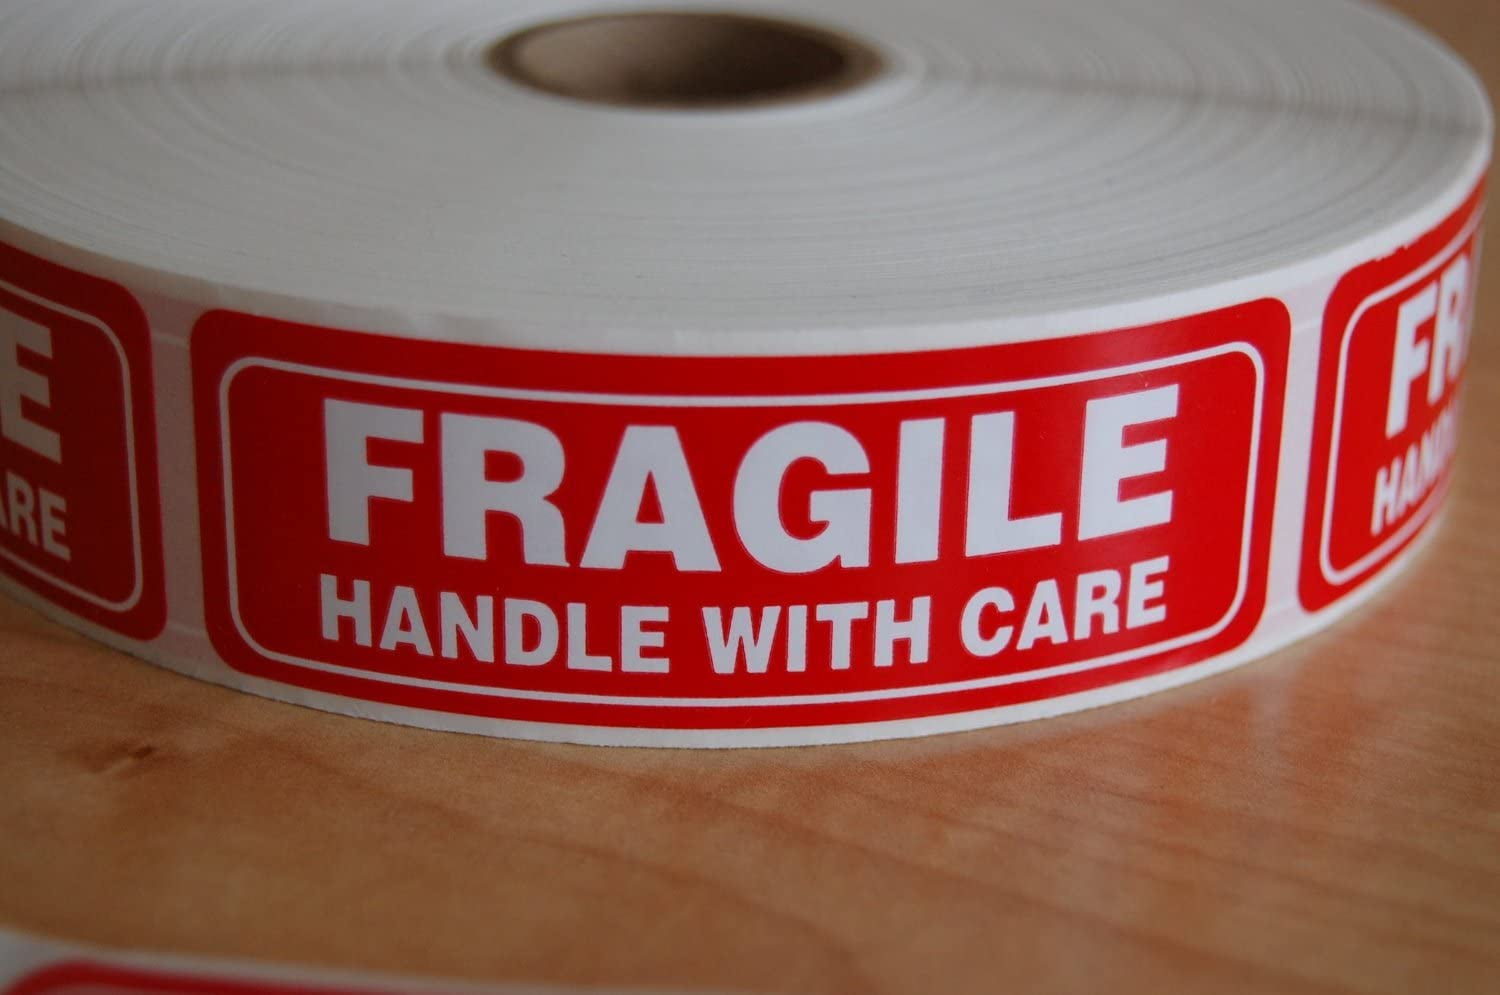 2 x FRAGILE handle with care stickers vinyl adhesive post packing label decal 